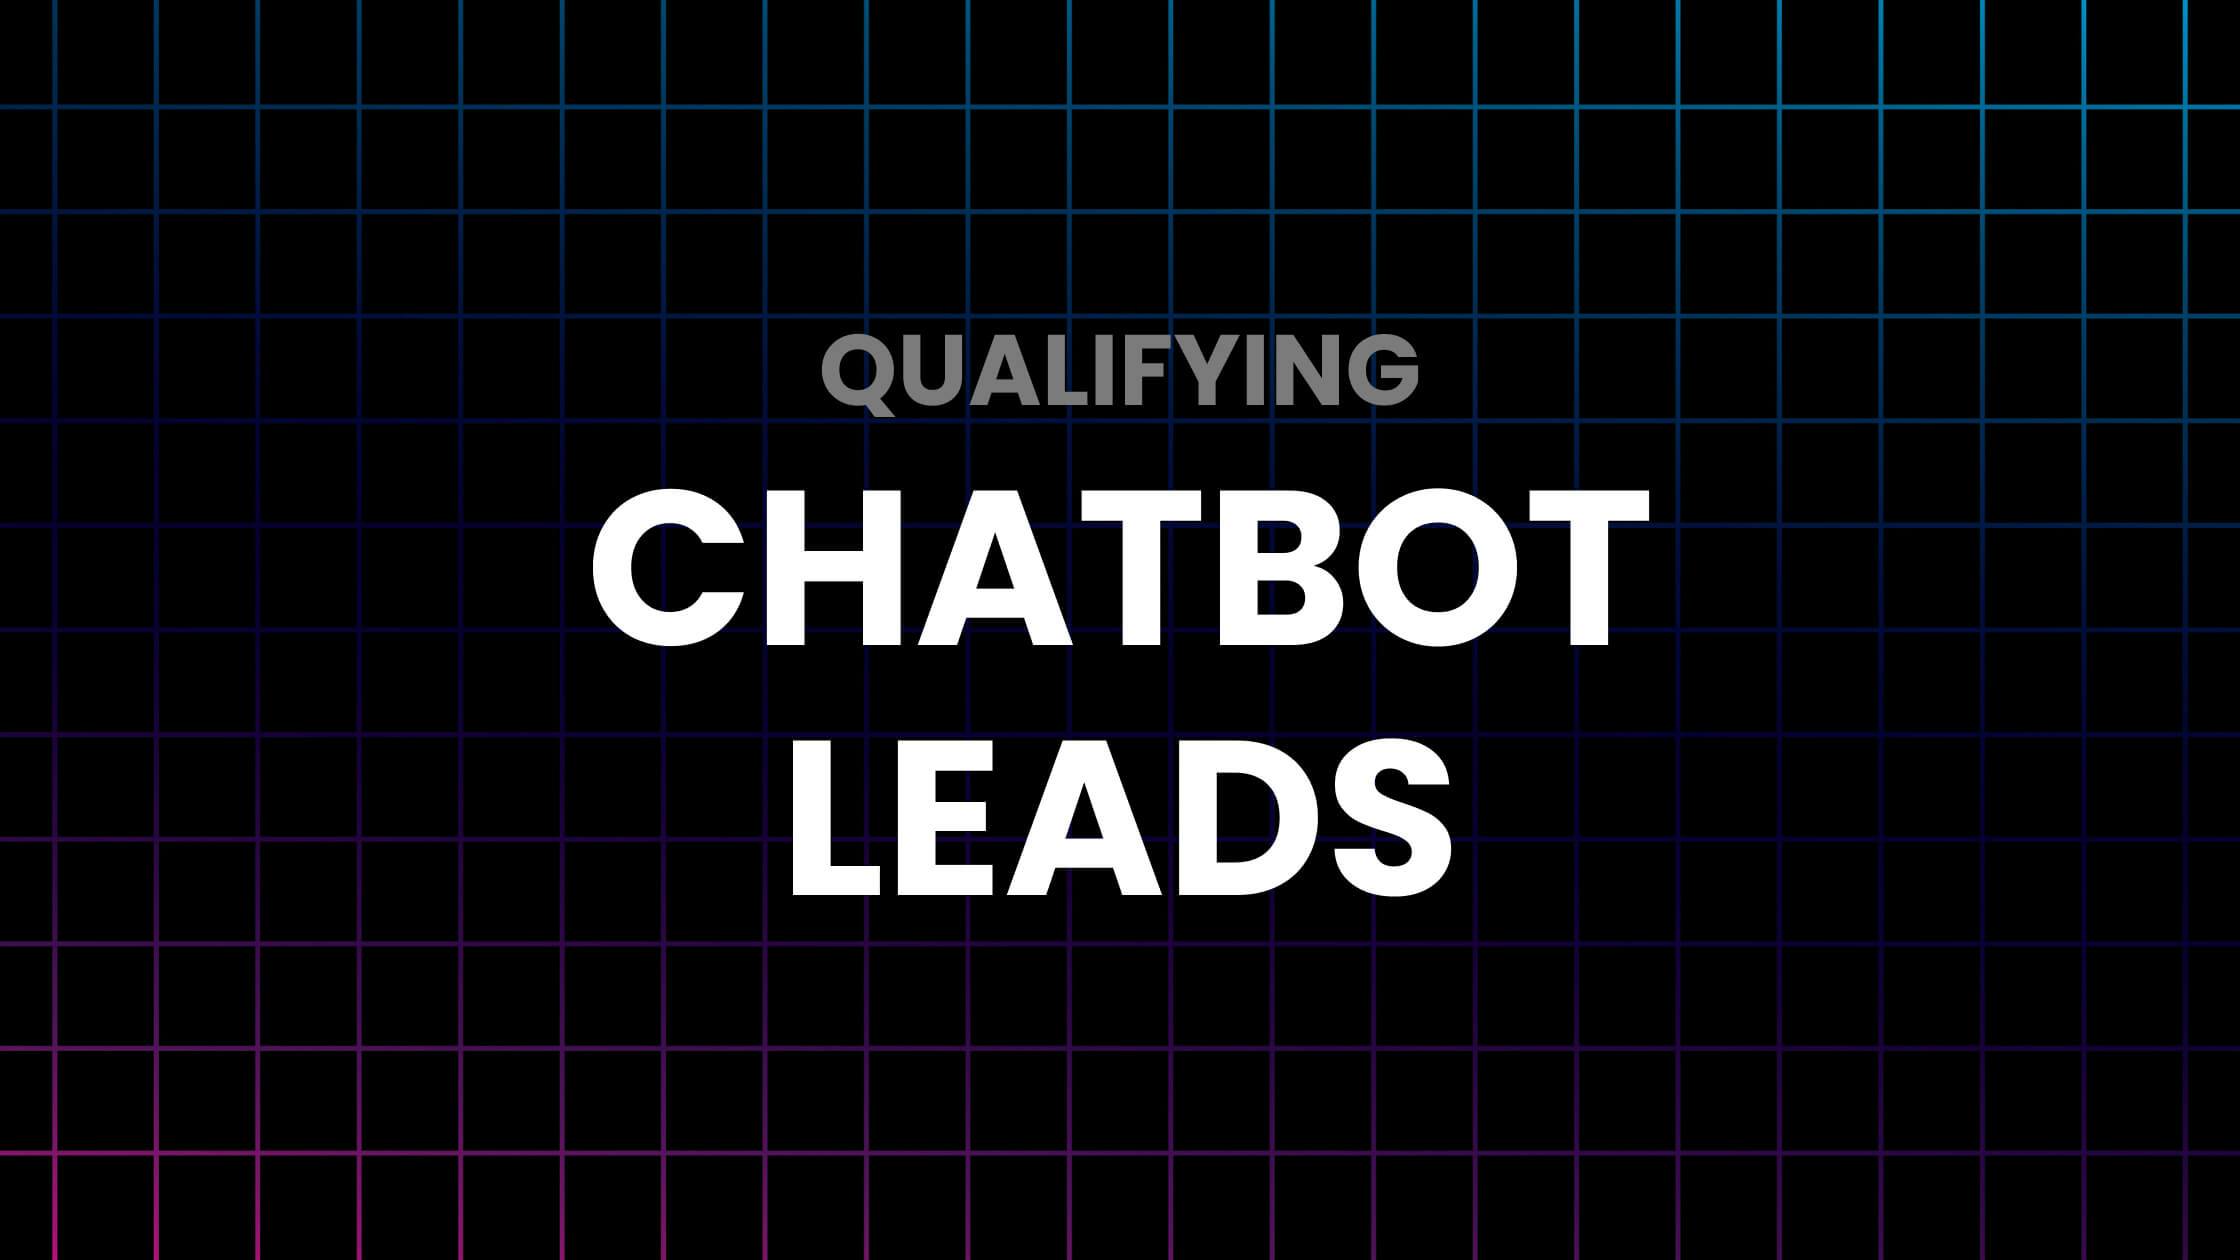 Our Guide on How Chatbots Qualify Leads